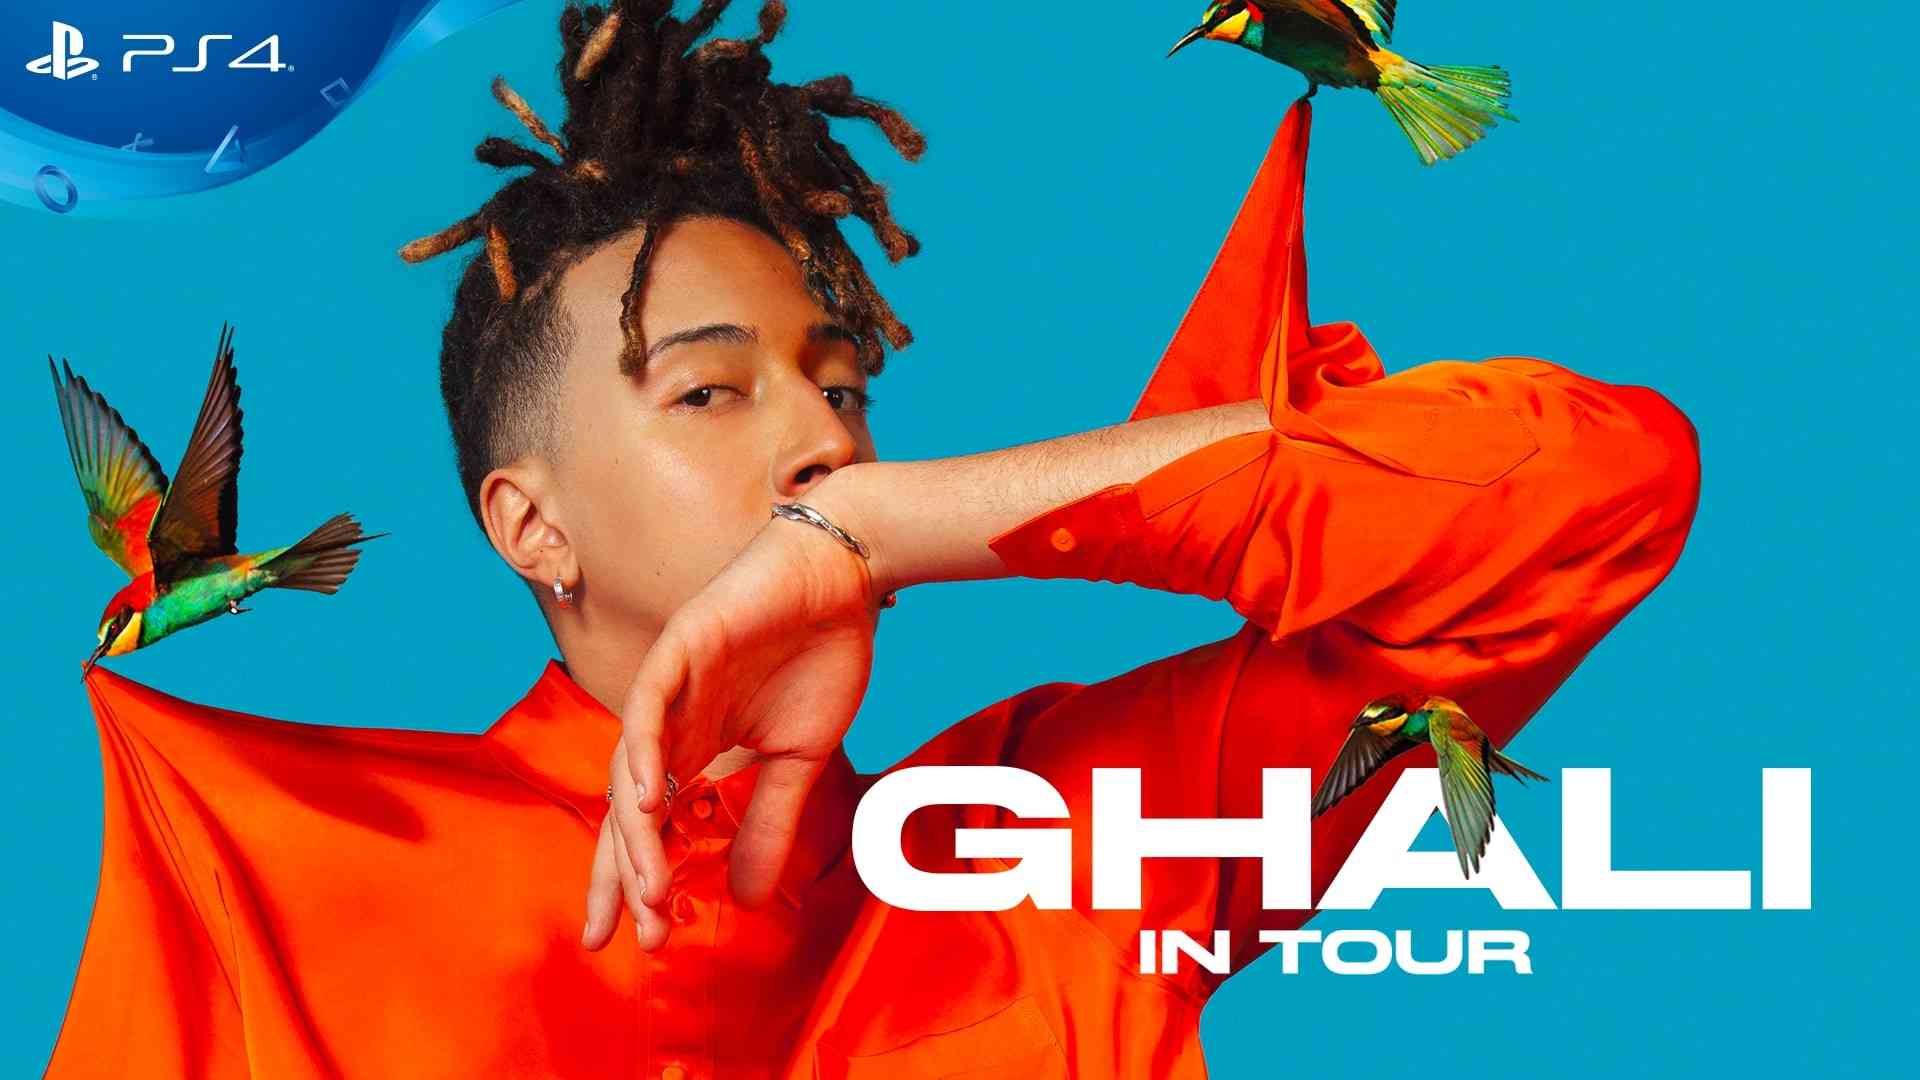 Ghali in tour PS4 min